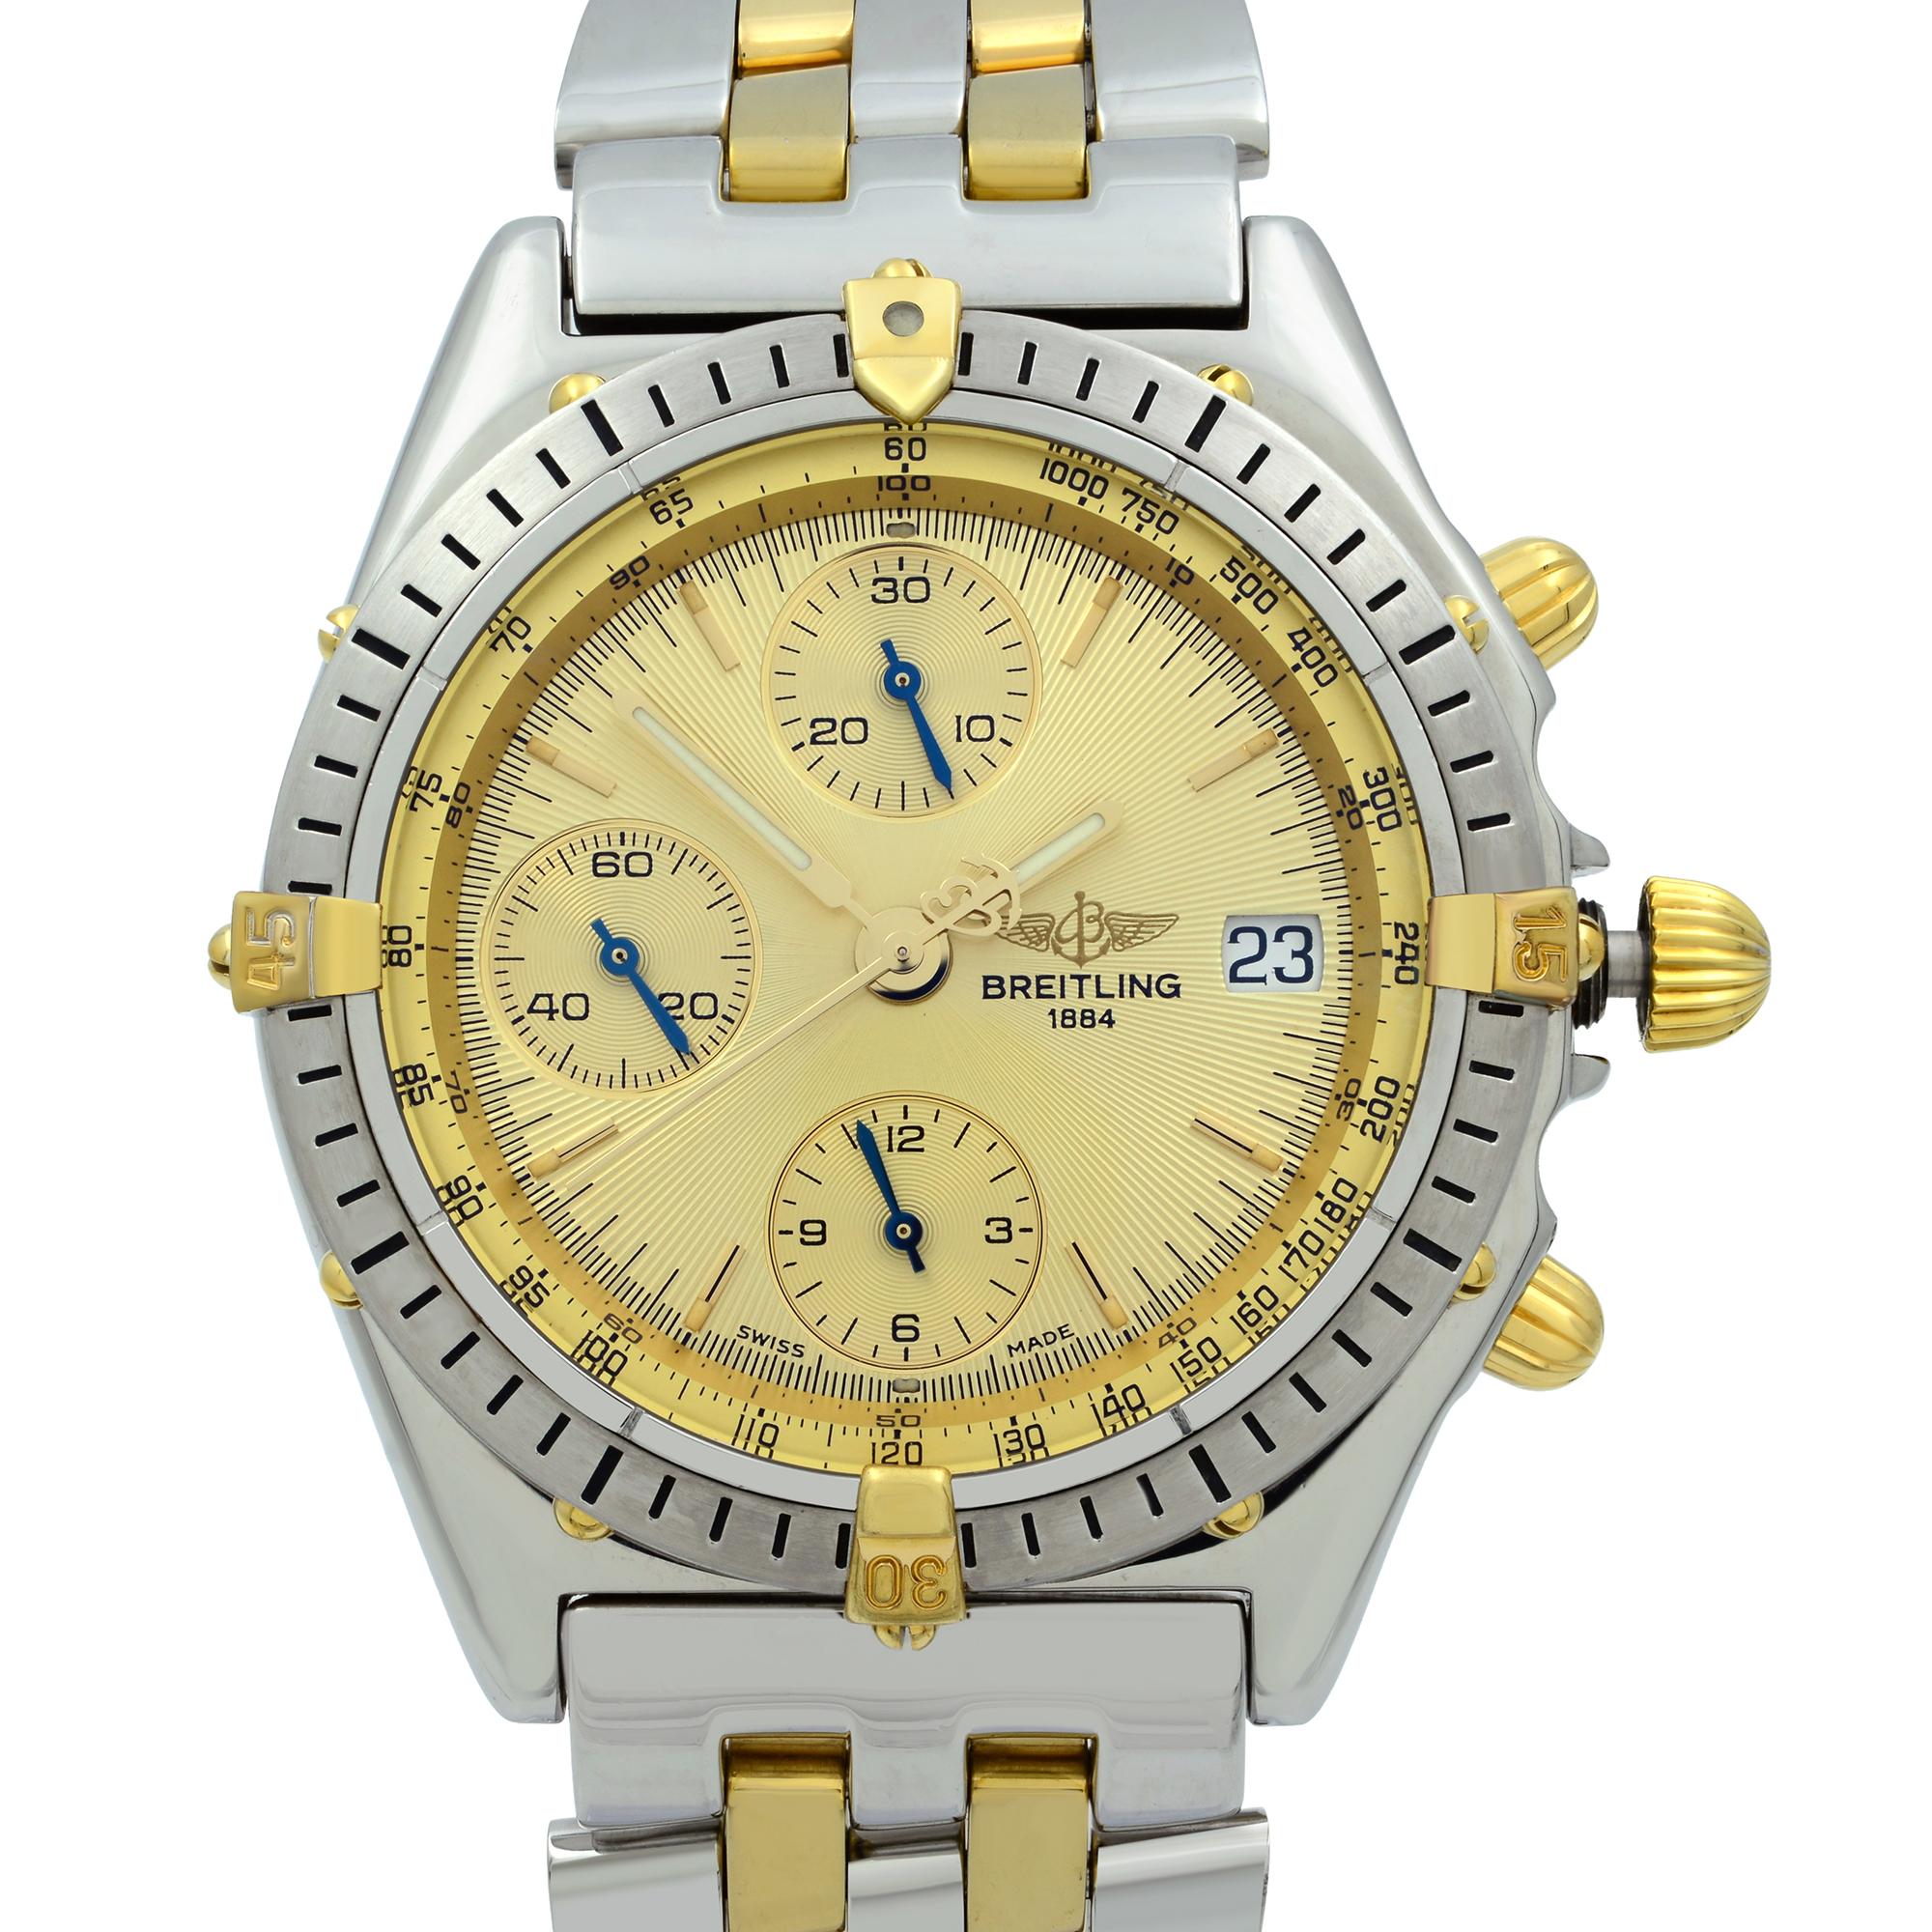 Pre-owned Breitling Chronomat 18K Yellow Gold Steel Champagne Dial Men's Watch. Crown has minor Fading due to use.  Original Box and Papers are not included comes with a Chronostore presentation box and authenticity card. Covered by a one-year